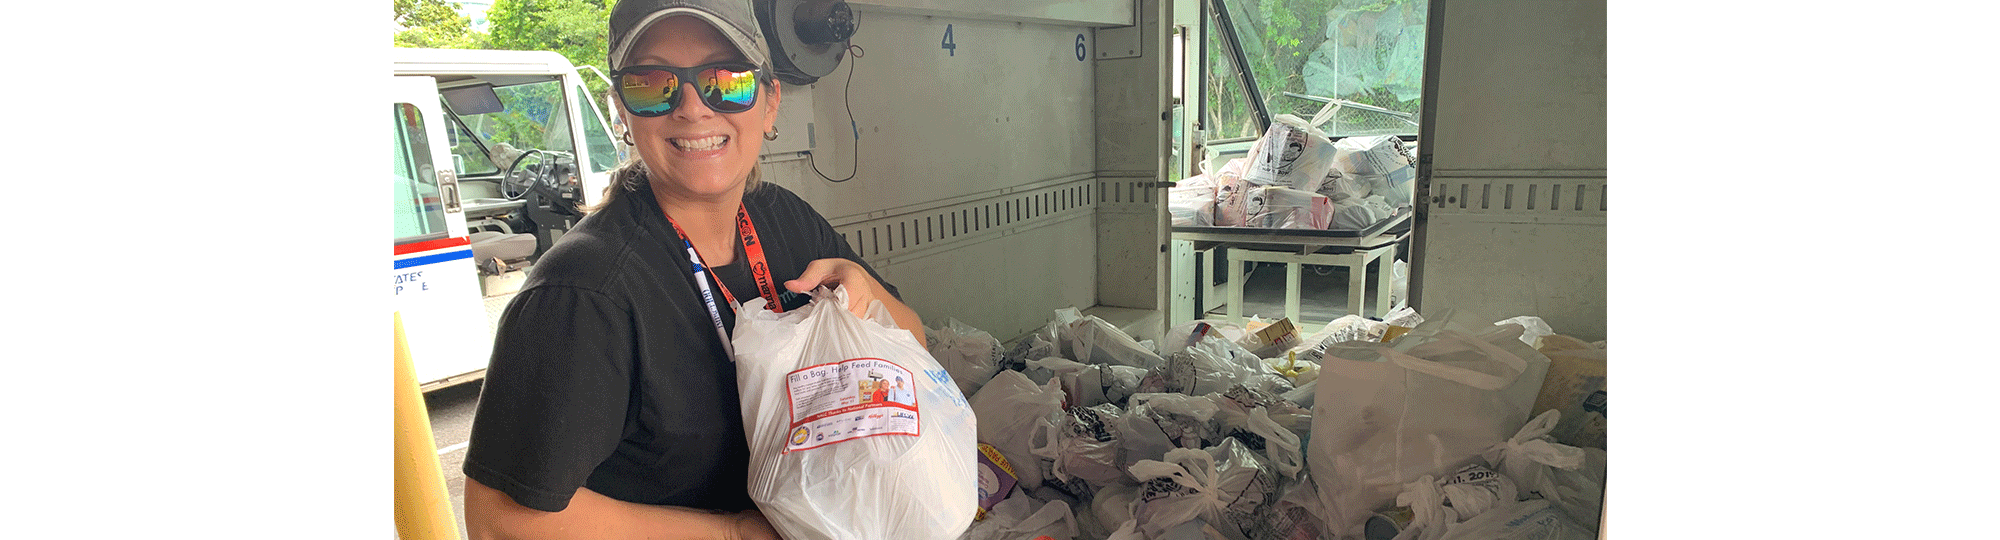 Letter carrier collects food donations